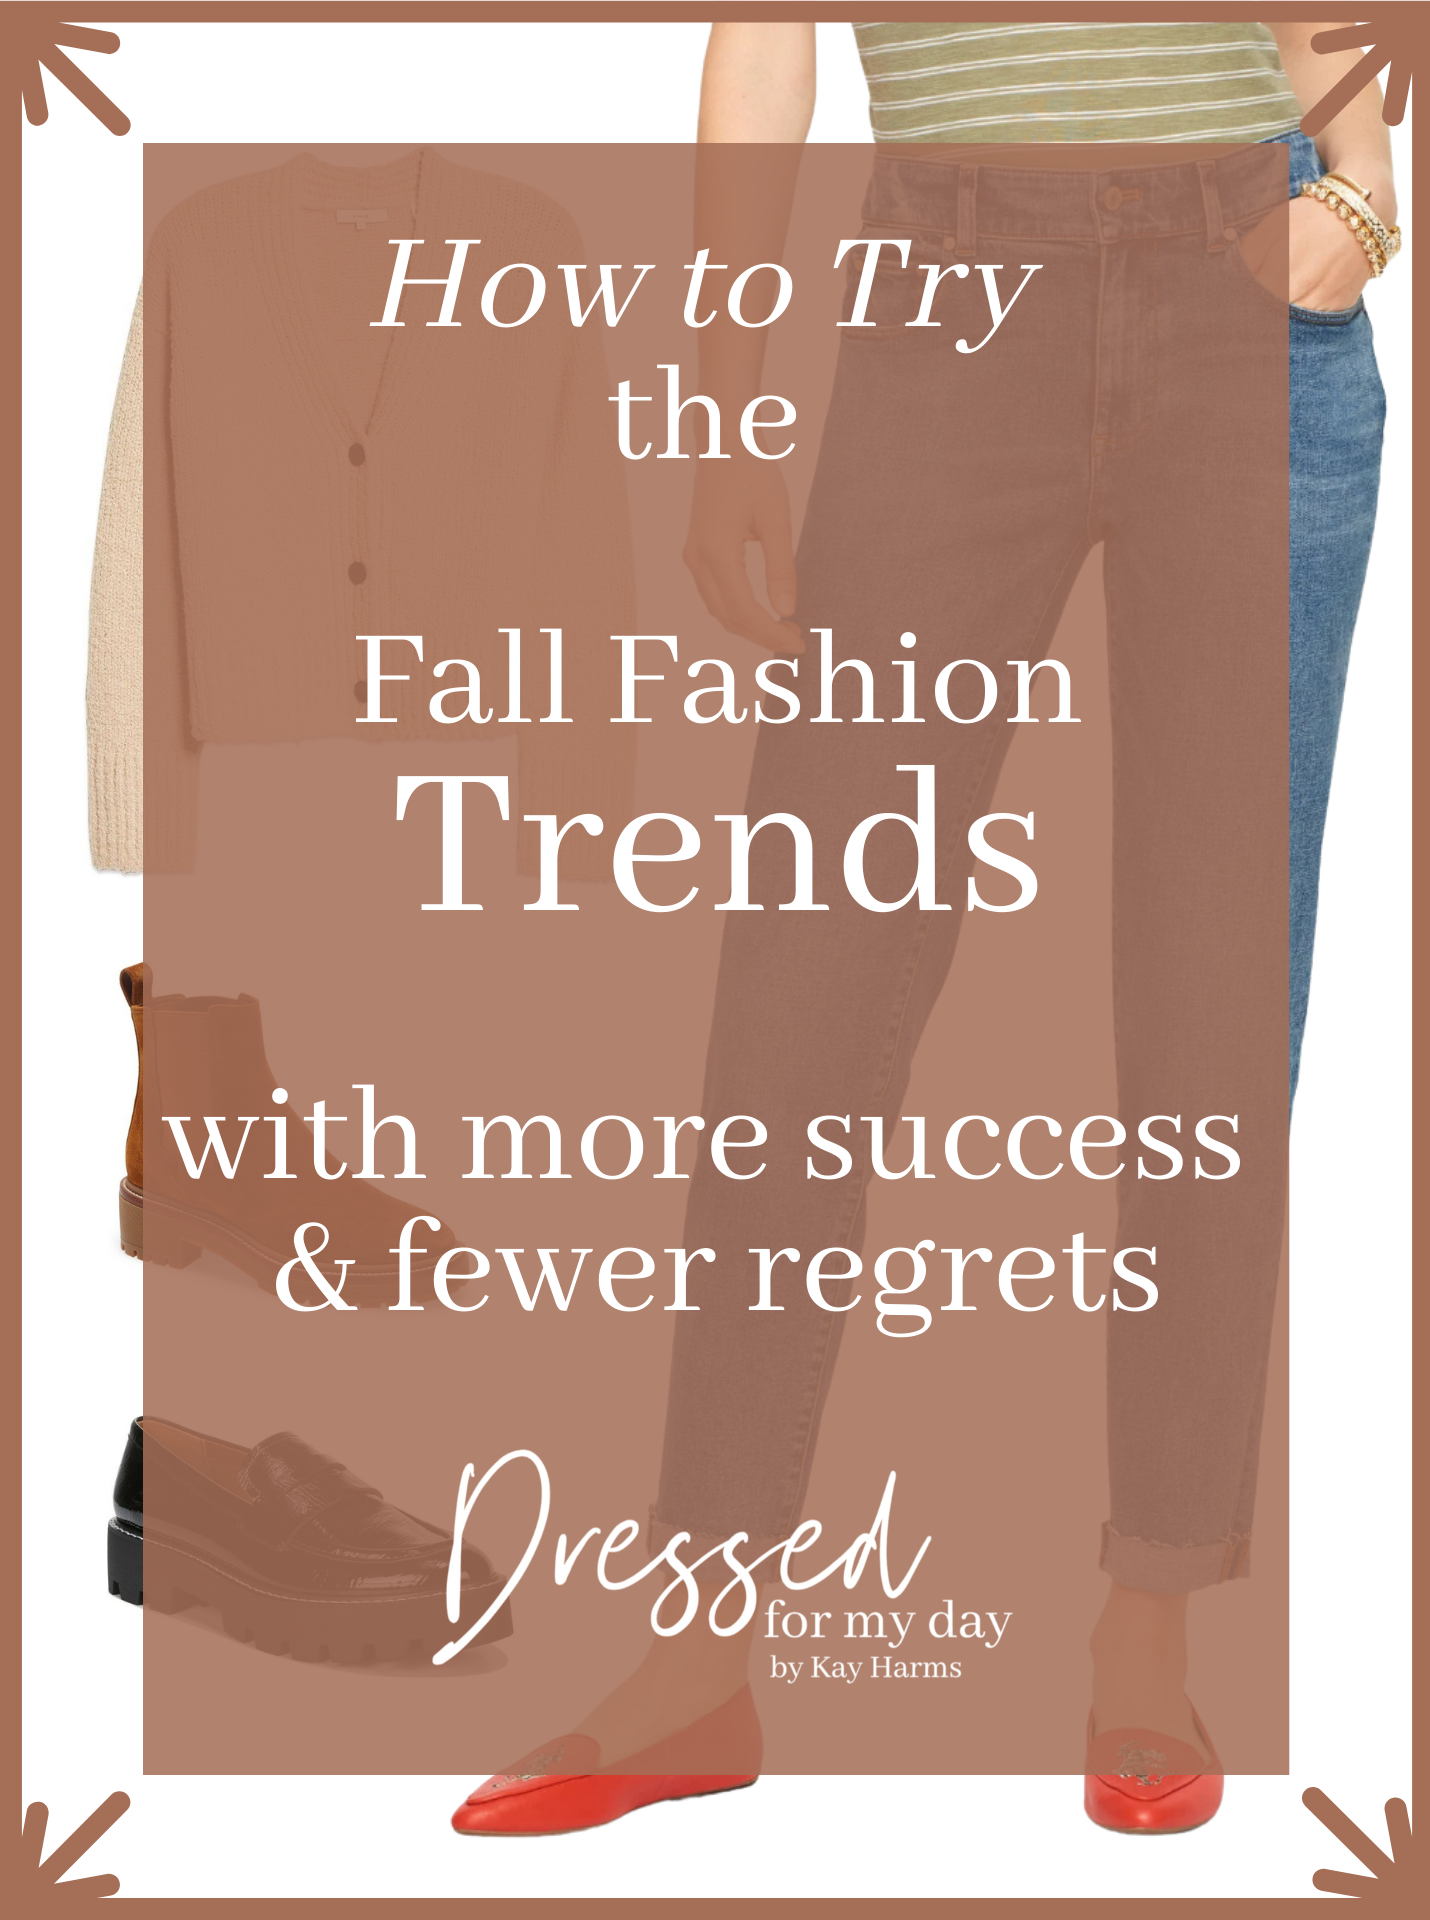 How to Try the Fall Fashion Trends